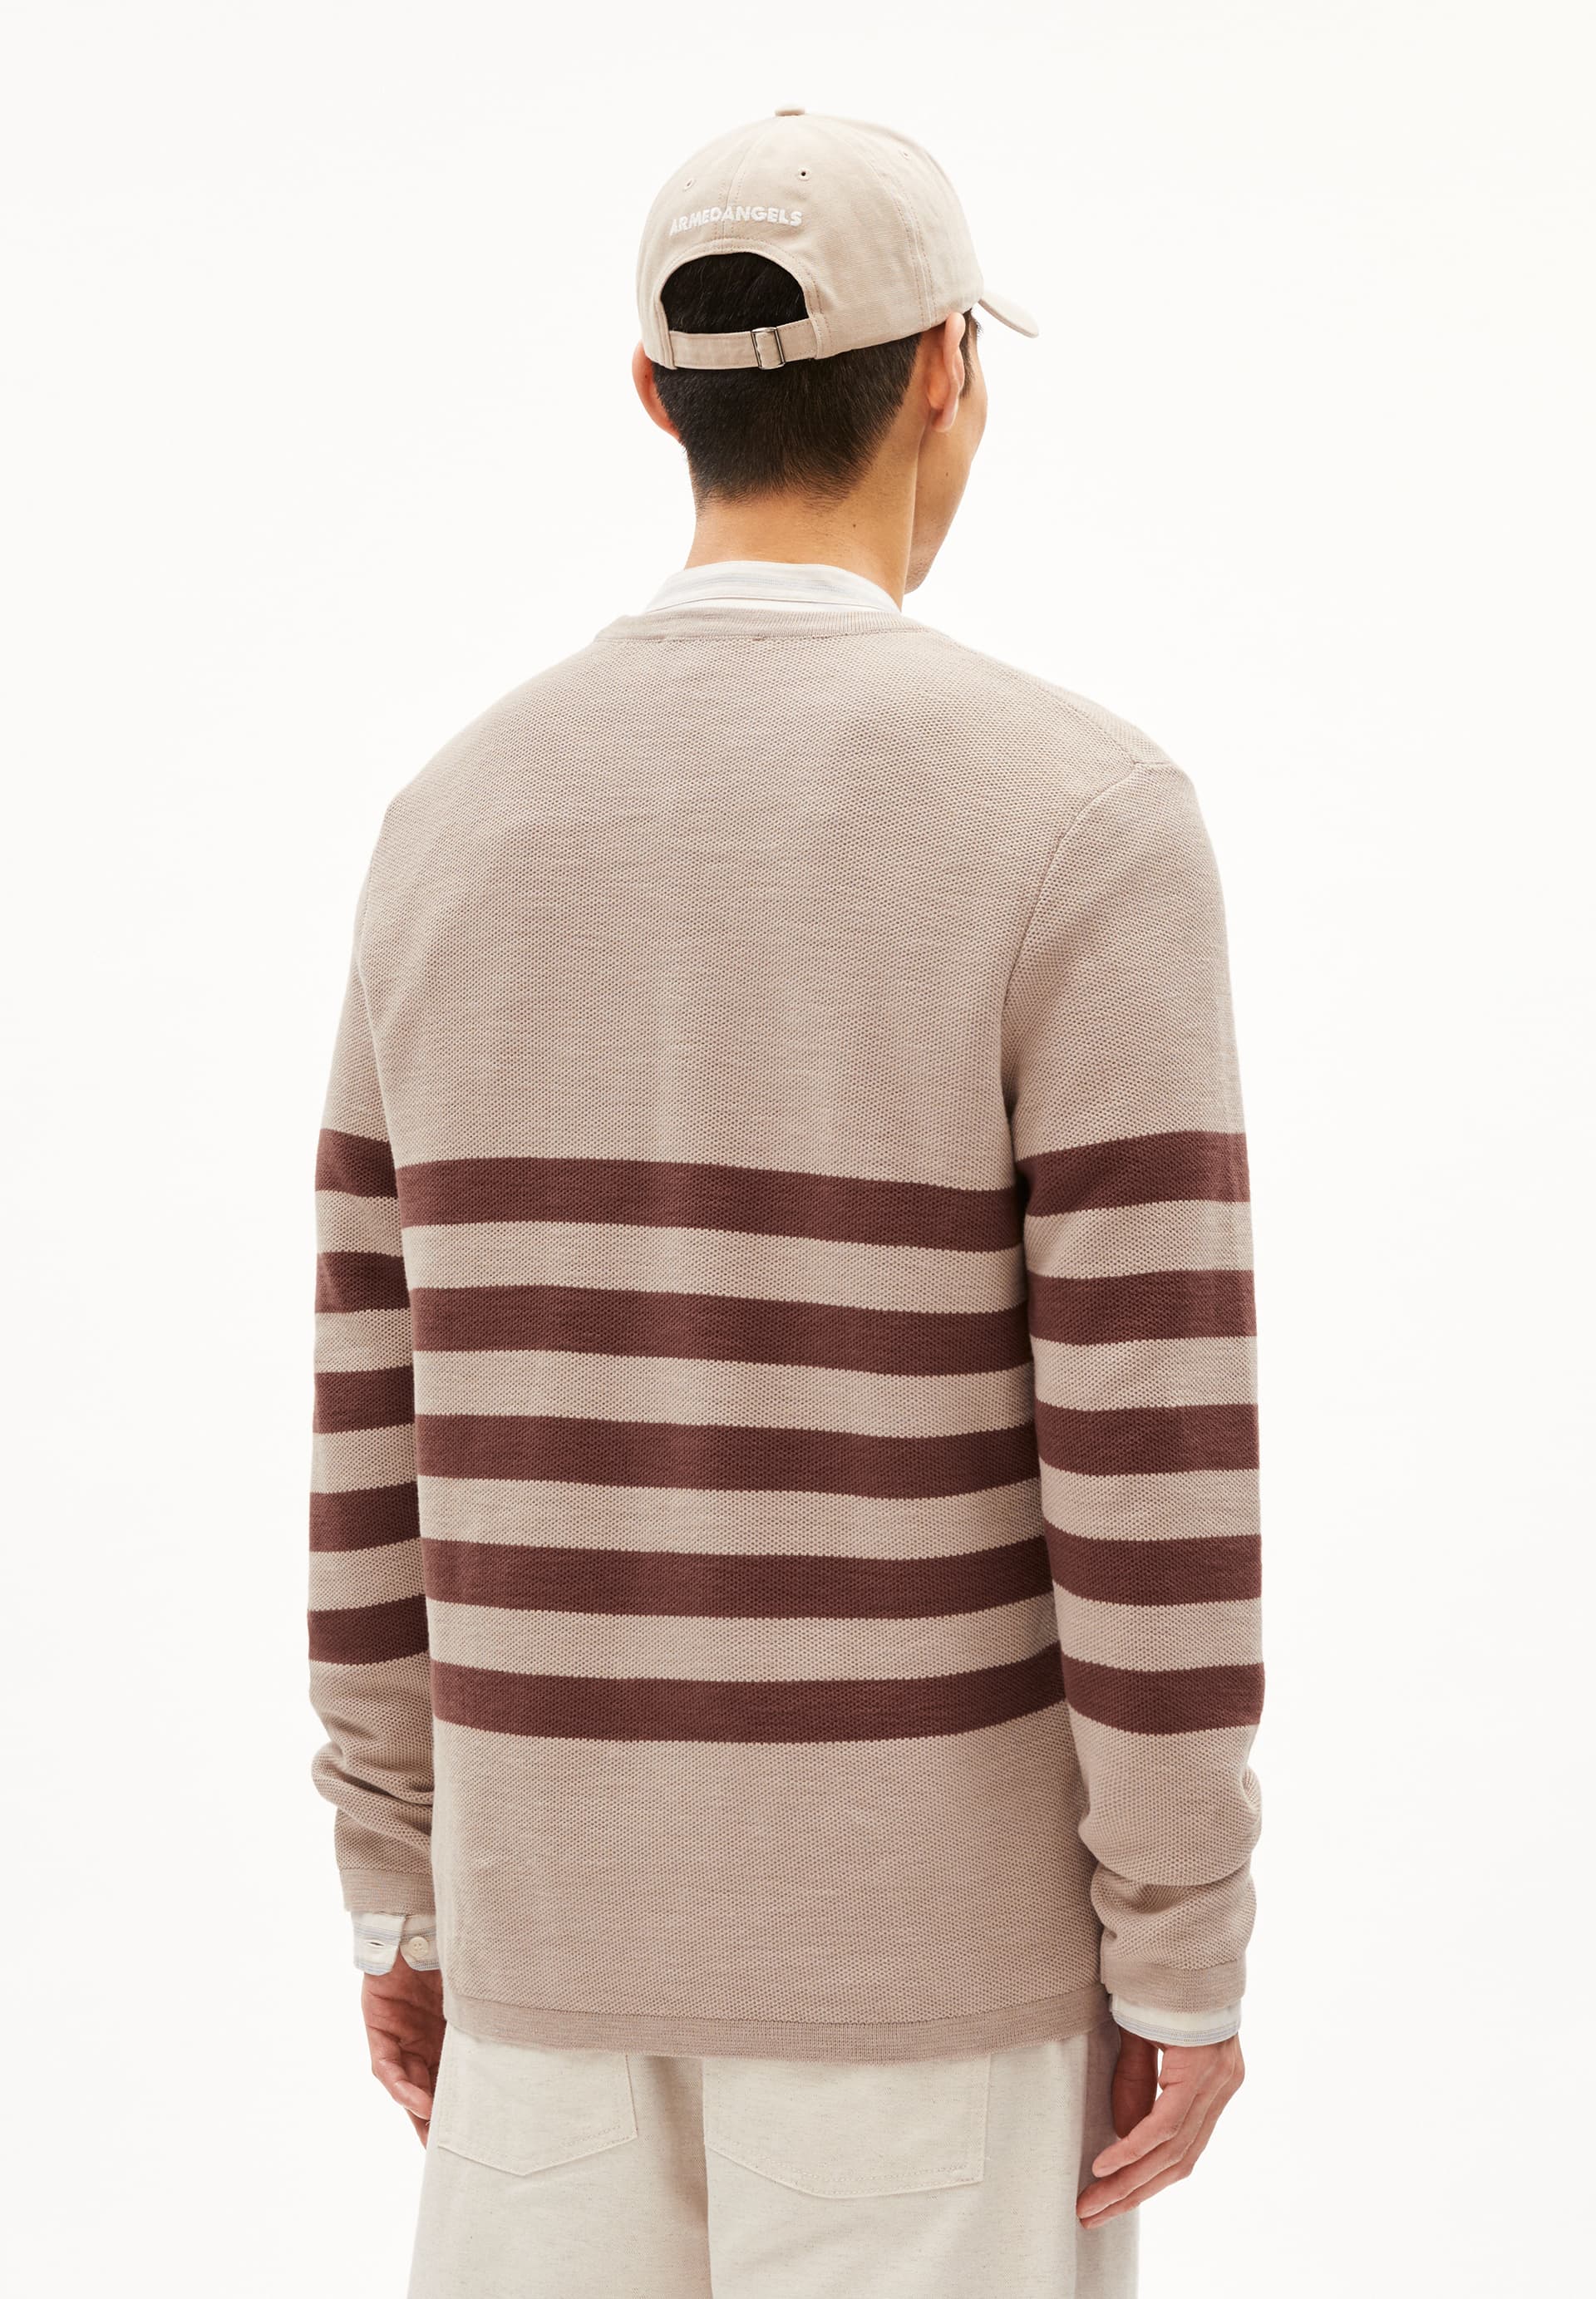 TOLAA STRIPES Sweater Regular Fit made of Organic Cotton